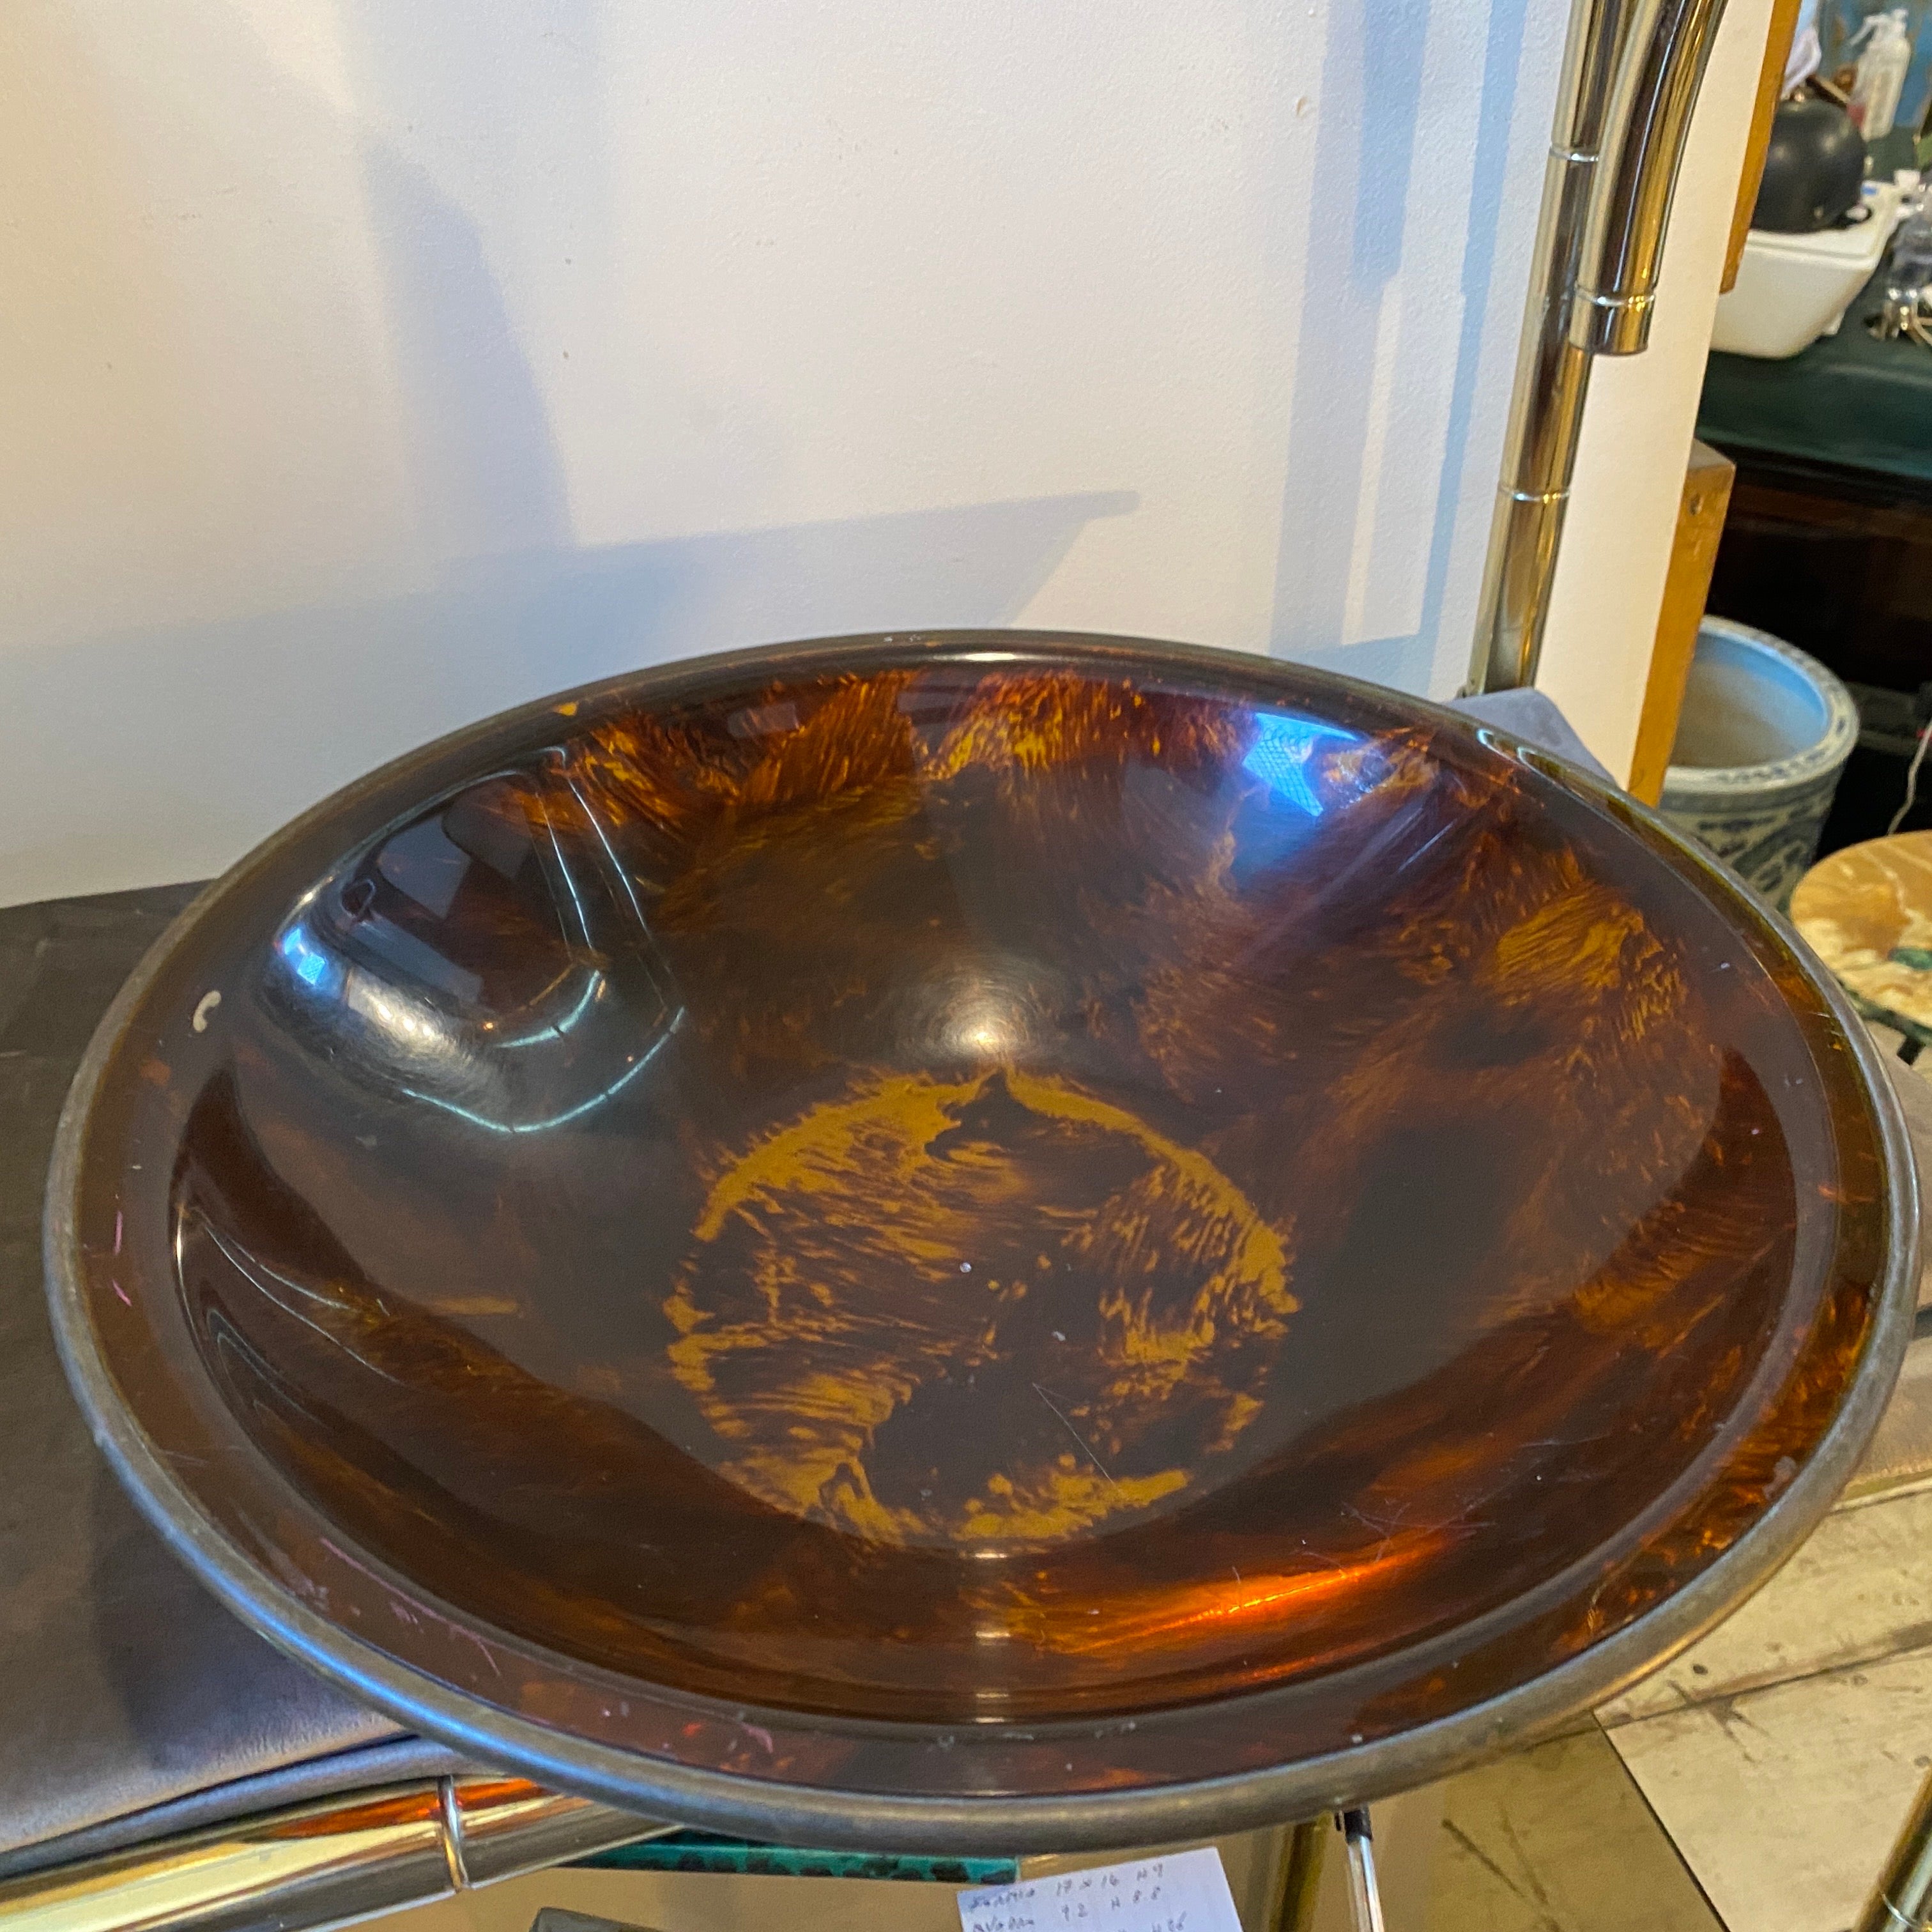 A Mid-Century Modern fake tortoise lucite and brass round bowl designed and manufactured in Italy in the style of Gabriella Crespi. Brass in original patina gives it a vibrant vintage look. The 1970s was a time of experimentation and innovation in